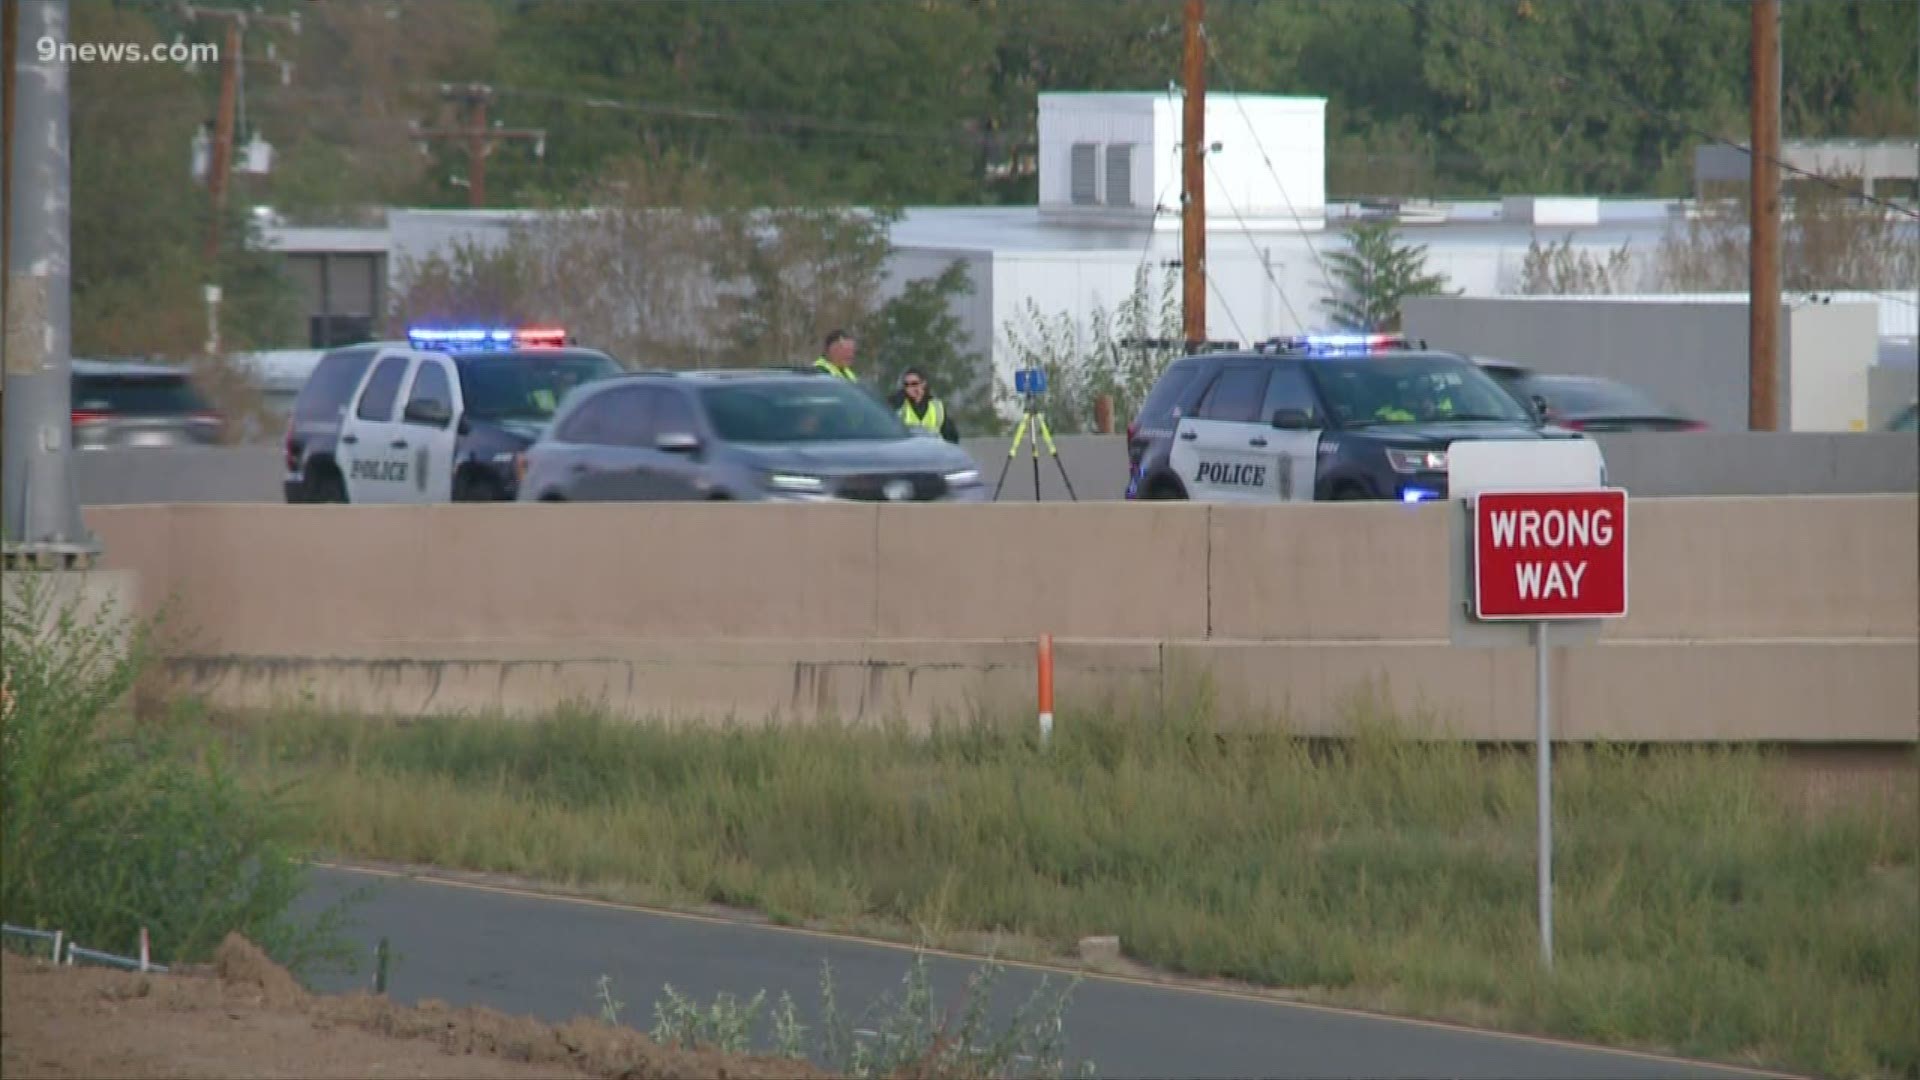 No charges are anticipated in connection with the crash near Sheridan Boulevard.